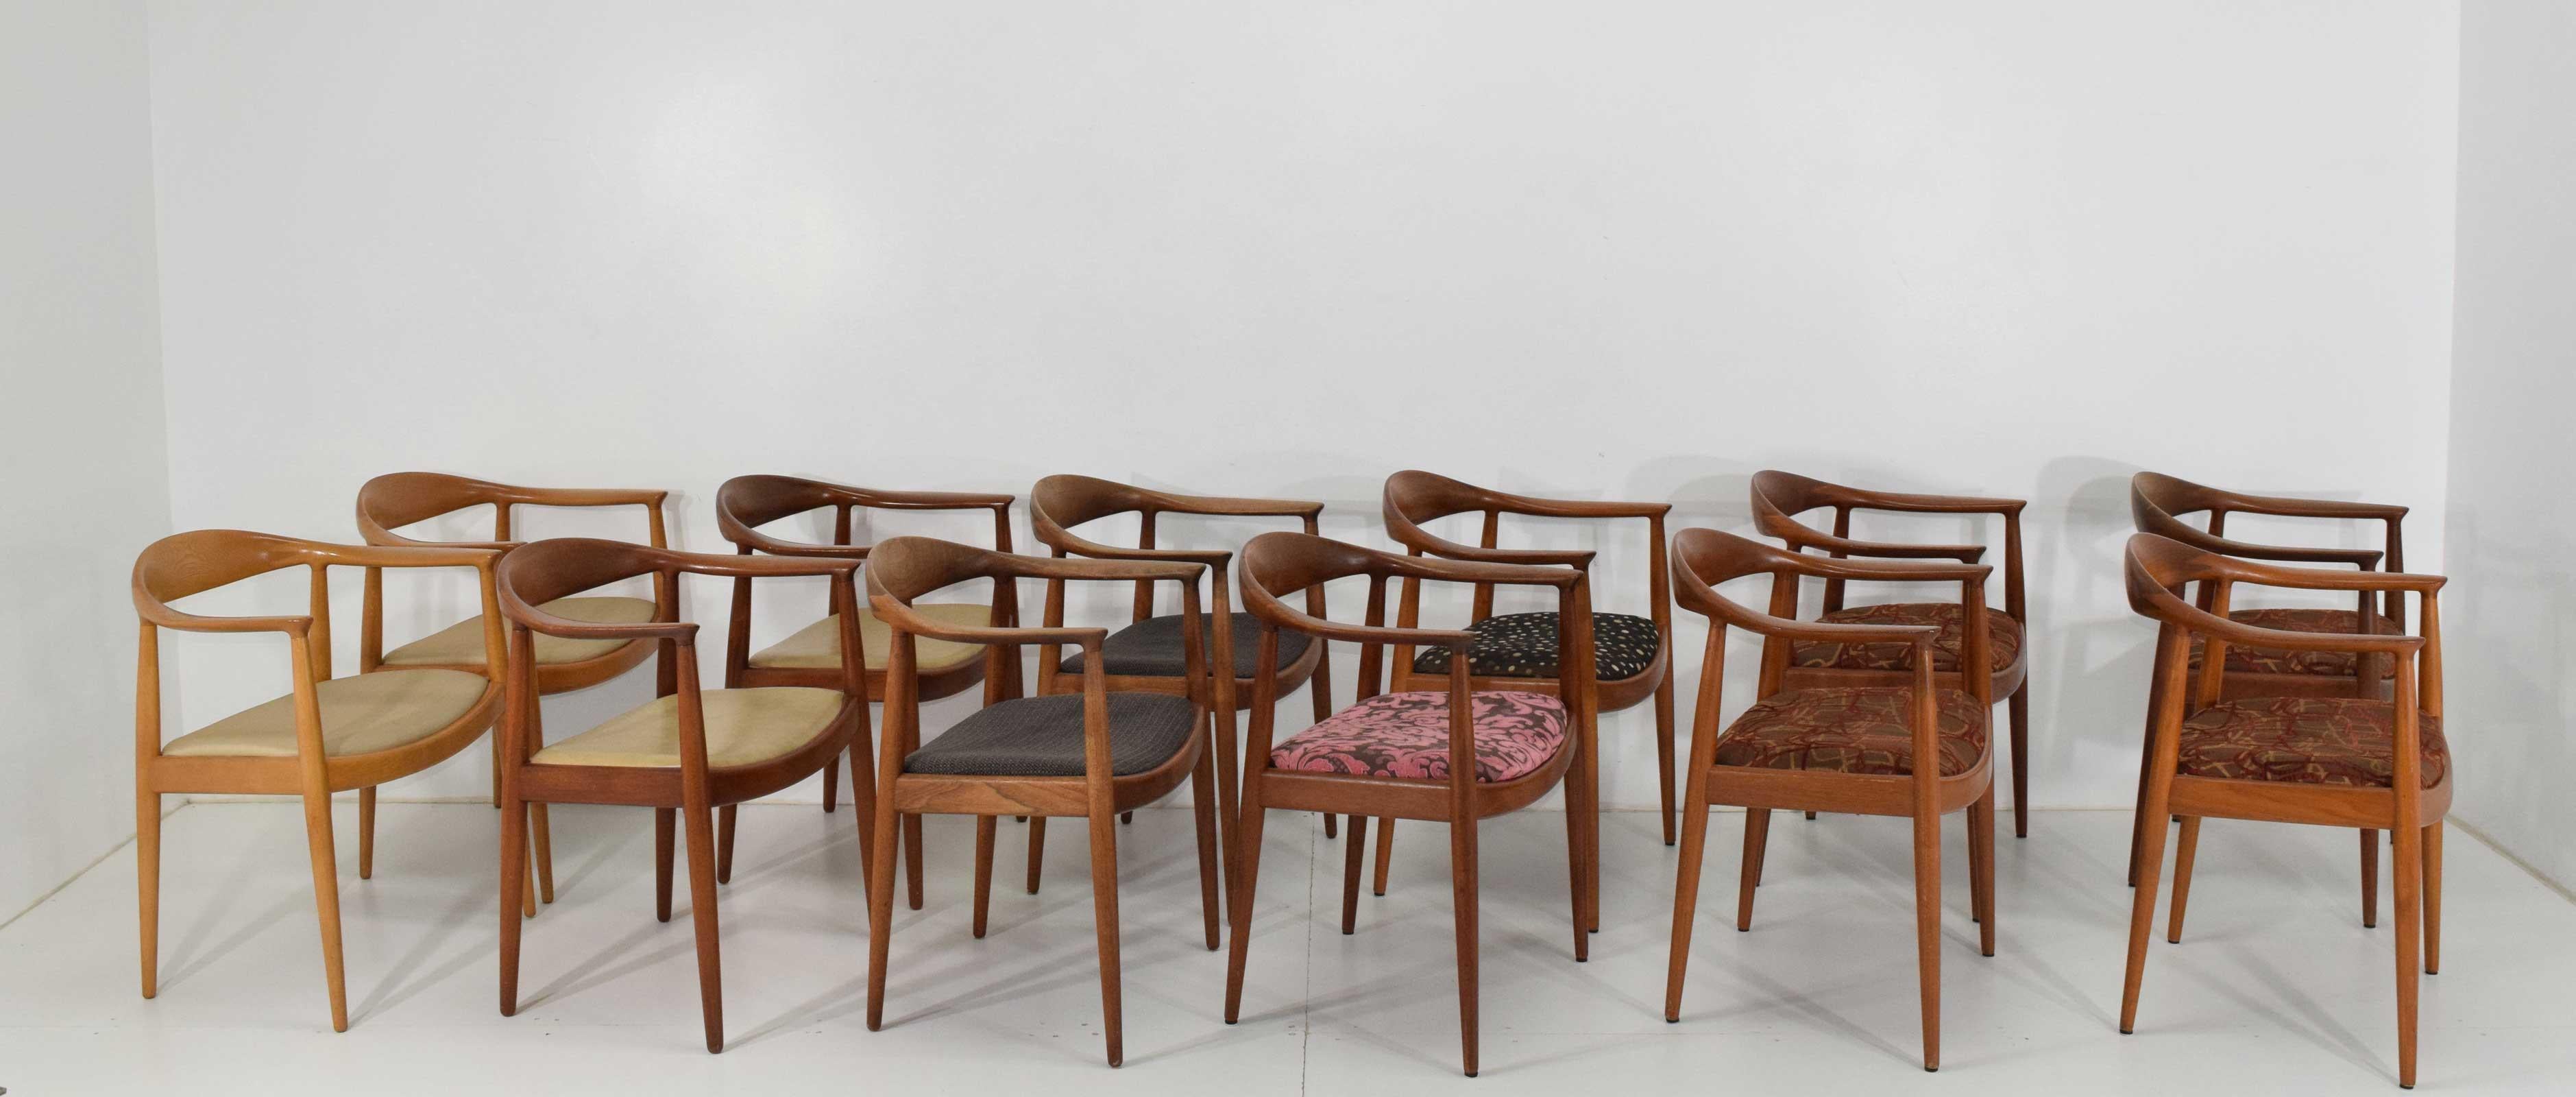 We have 8 Hans Wegner round chairs often referred to as 